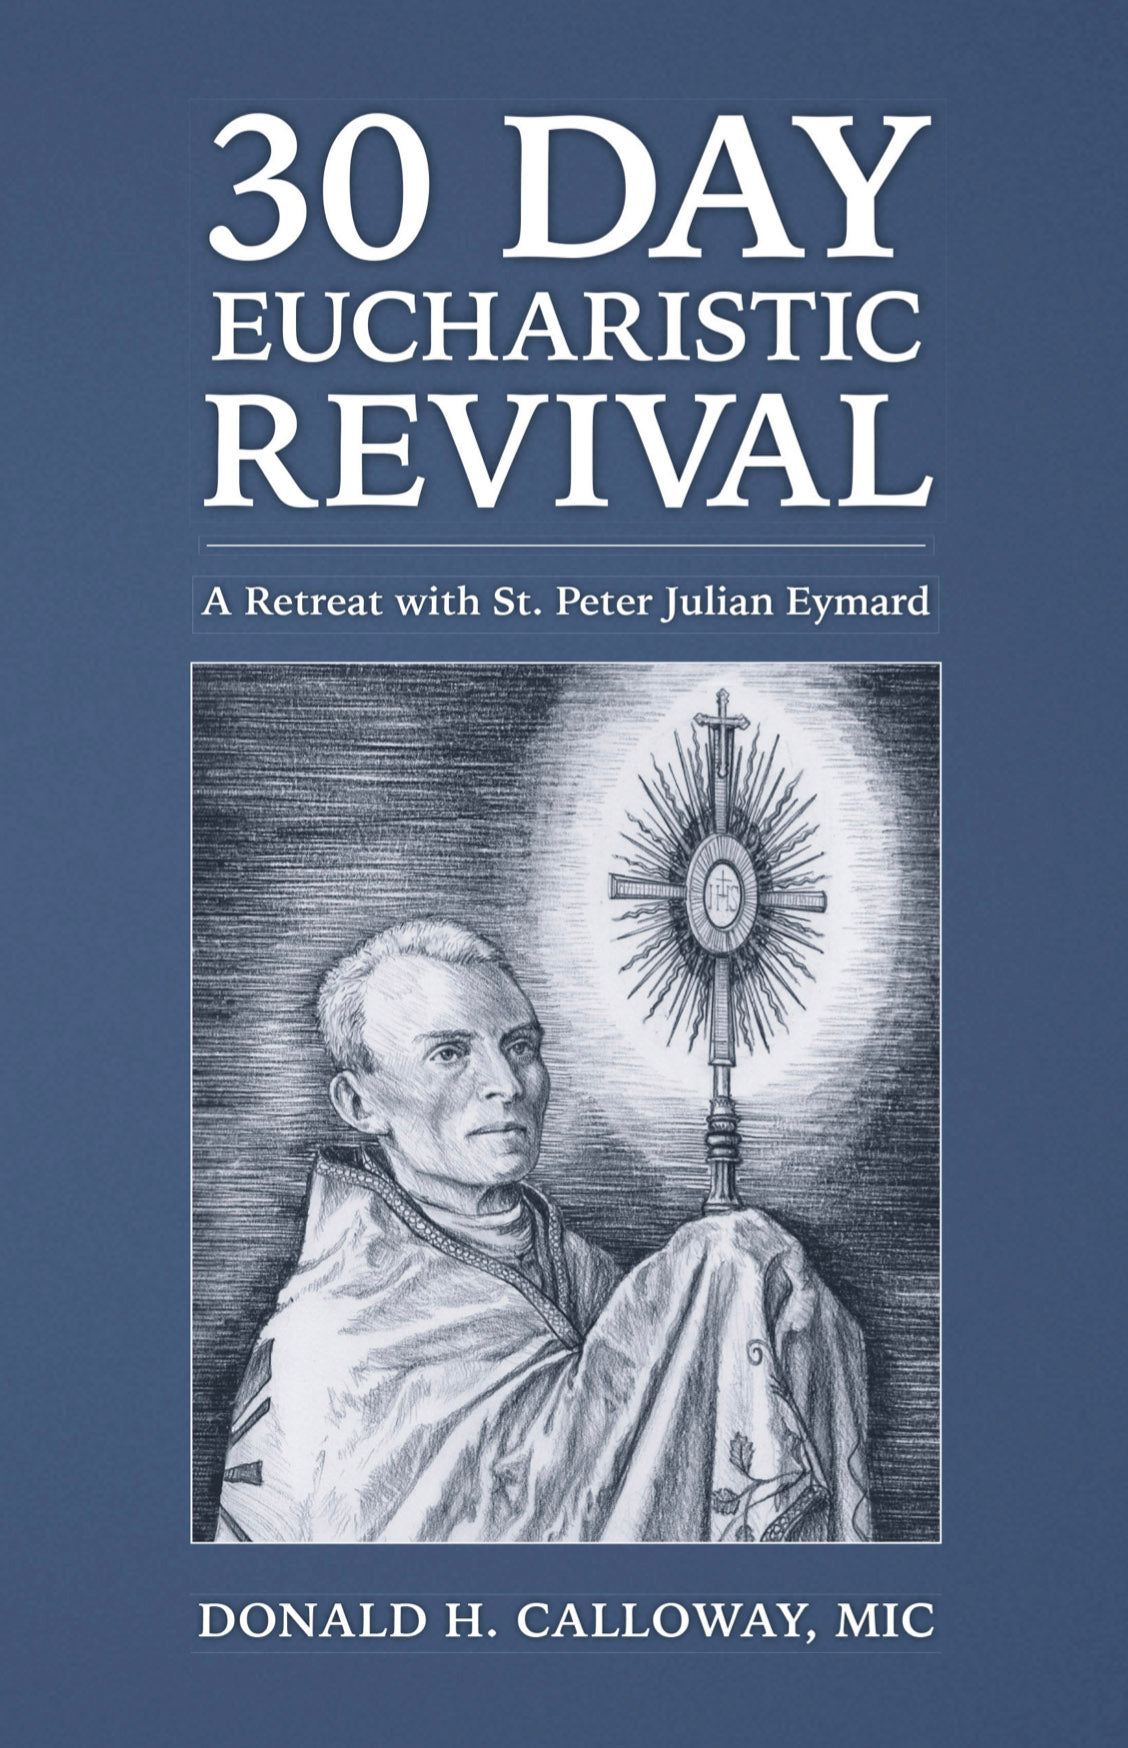 30 Day Eucharistic Revival - by Fr. Donald H. Calloway